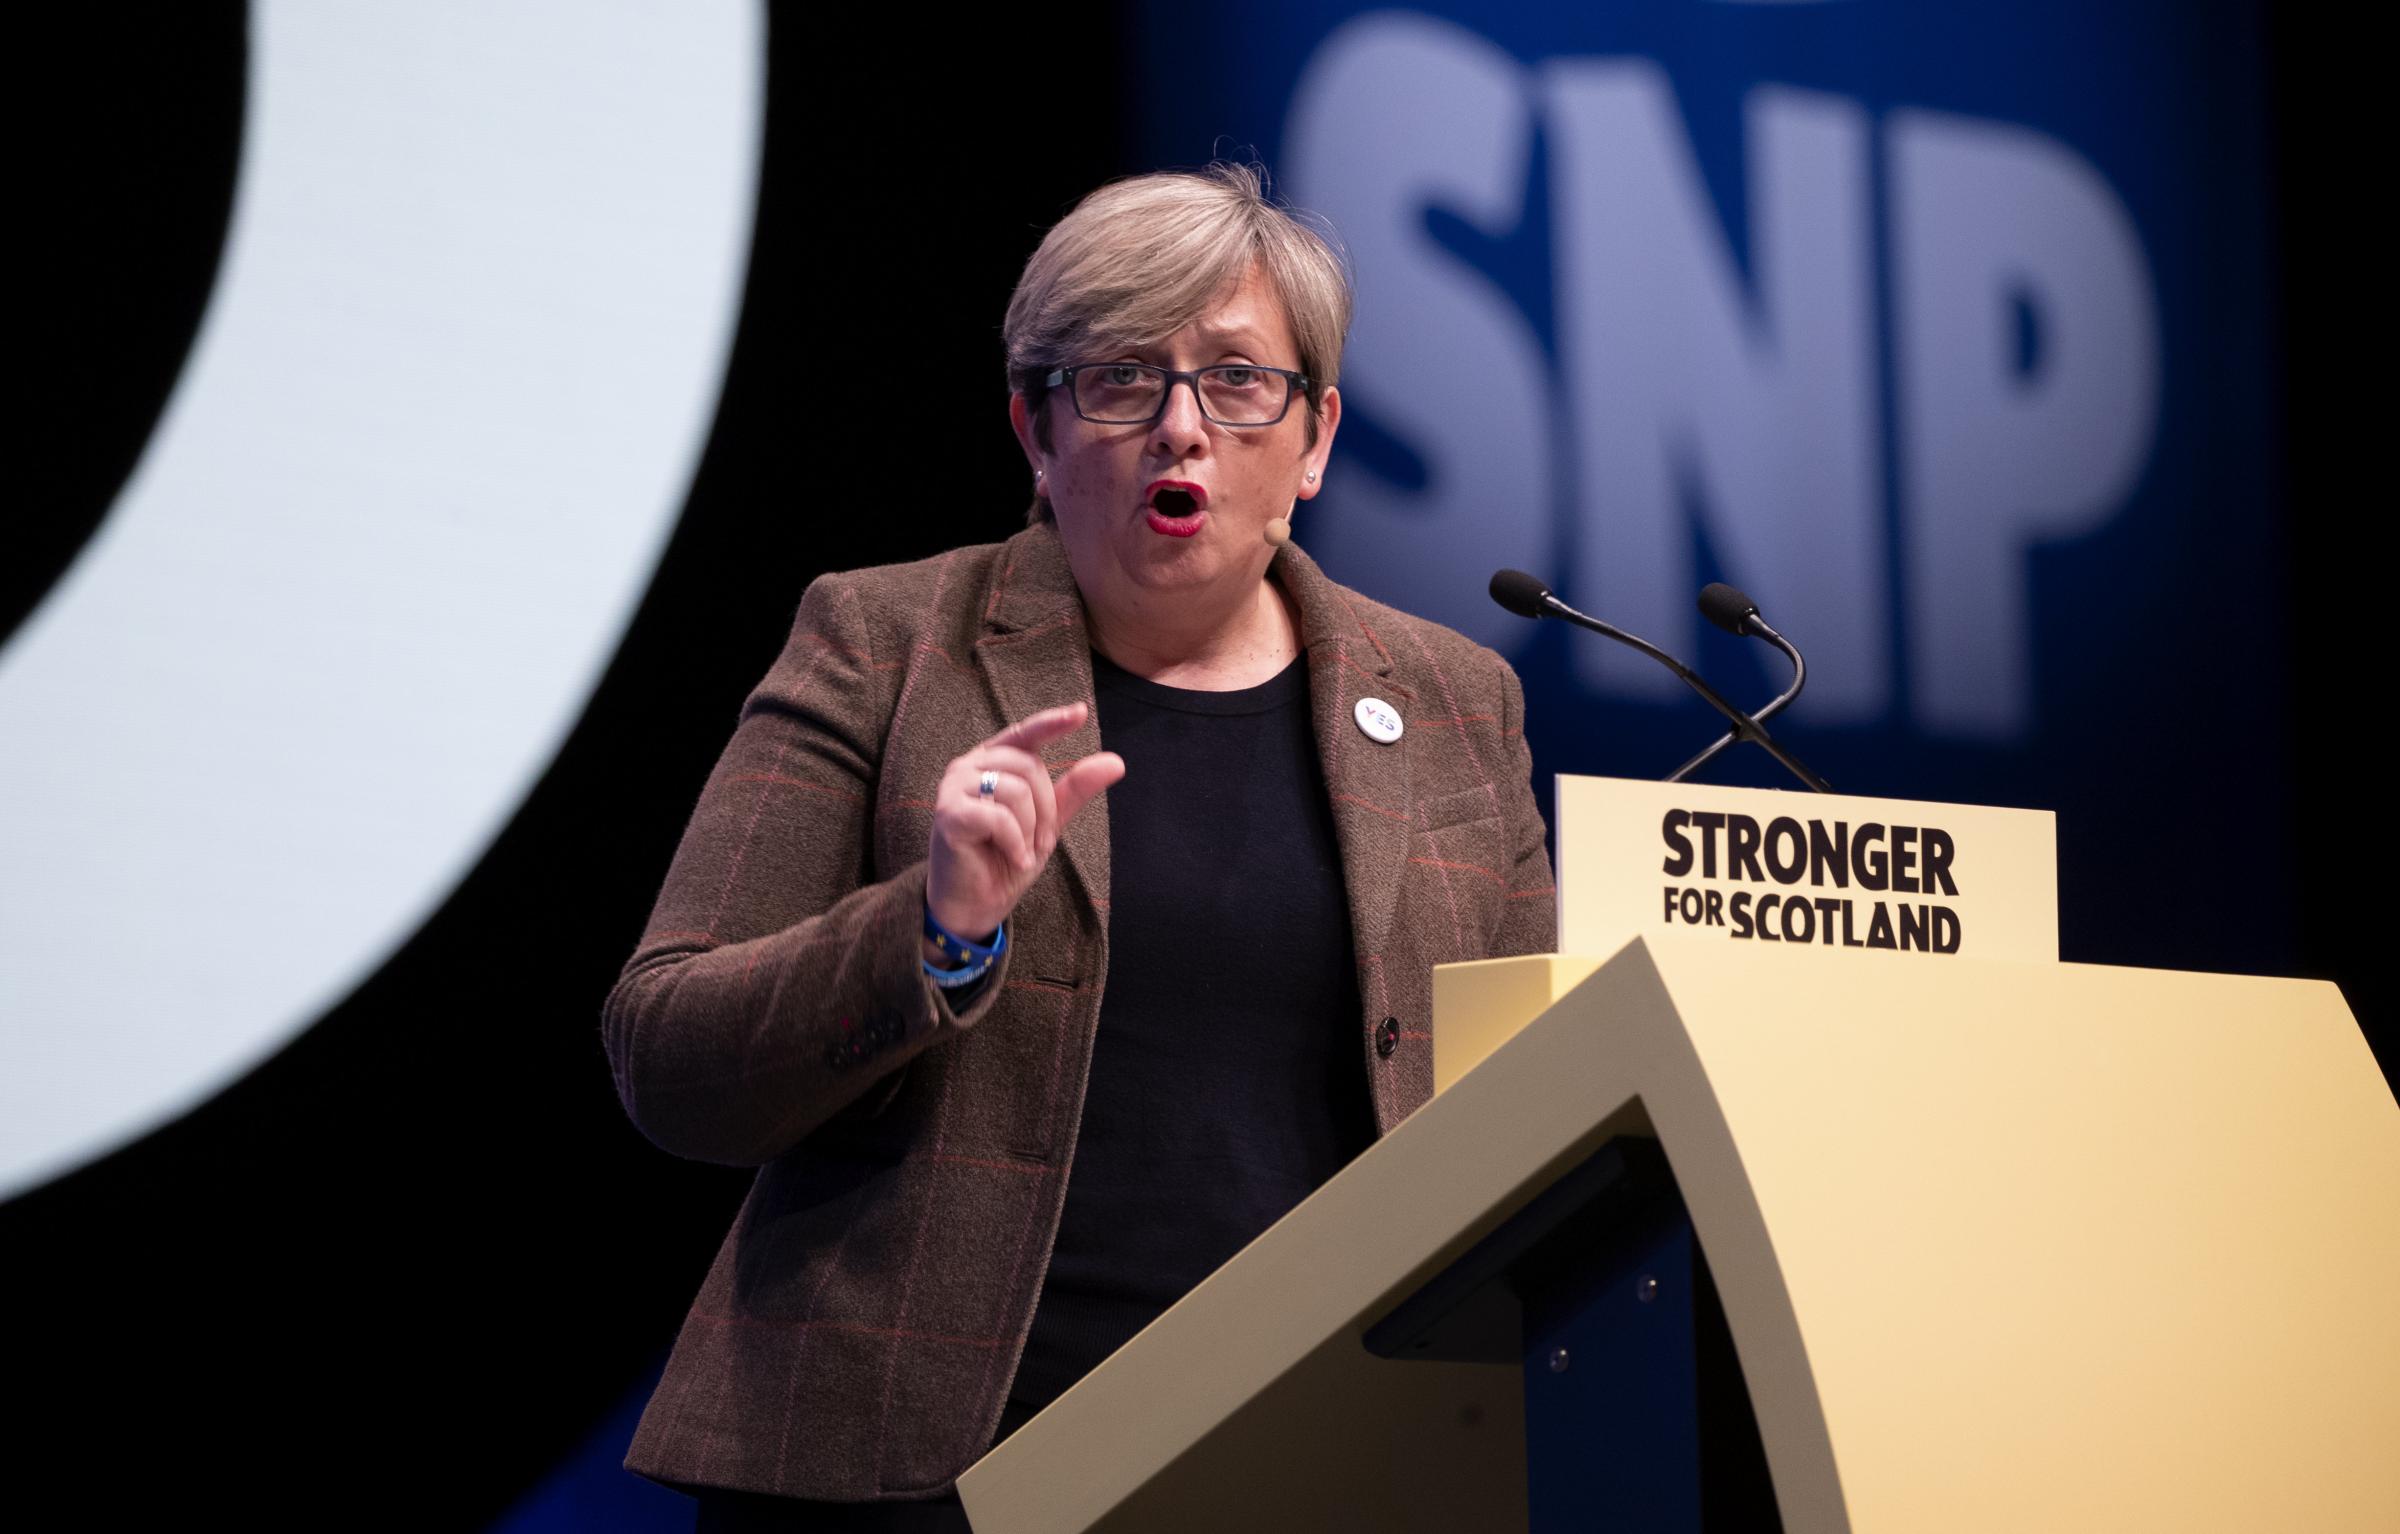 Joanna Cherry announces return to work after period of ill-health